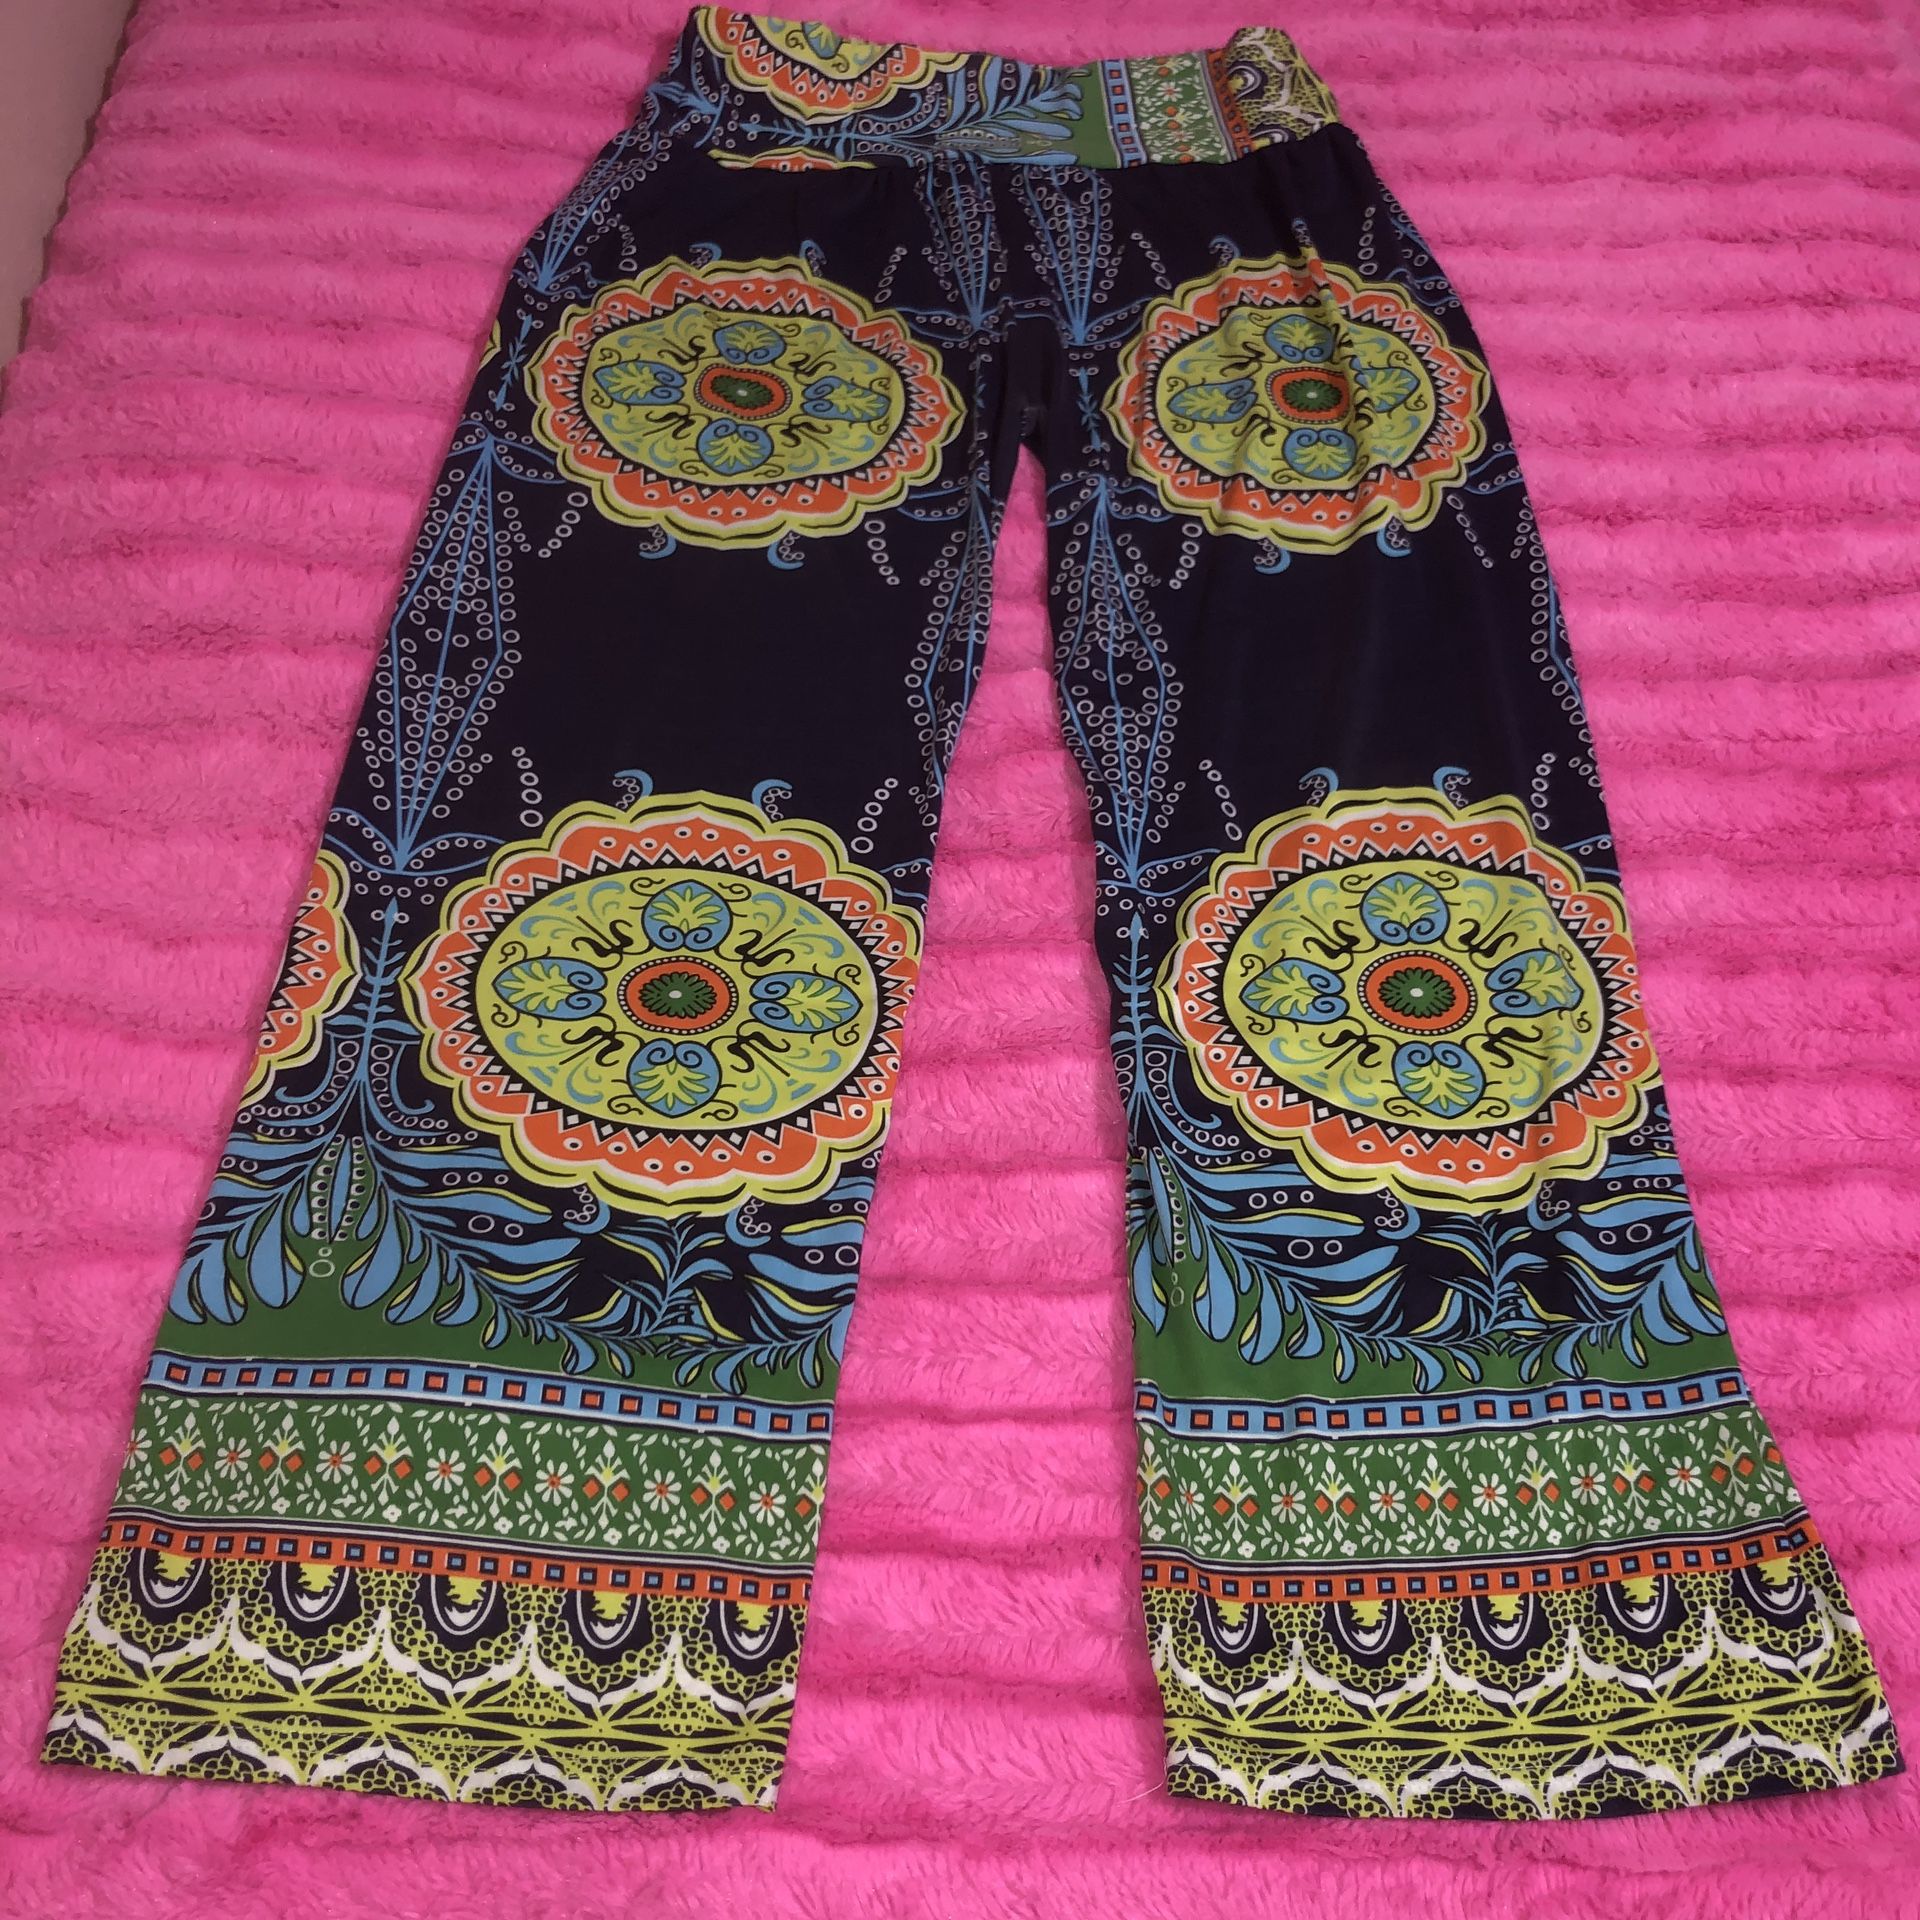 Women’s size LARGE Gamiss colorful pants. WAIST:26” LENGTH:34” LEG OPENING:9”